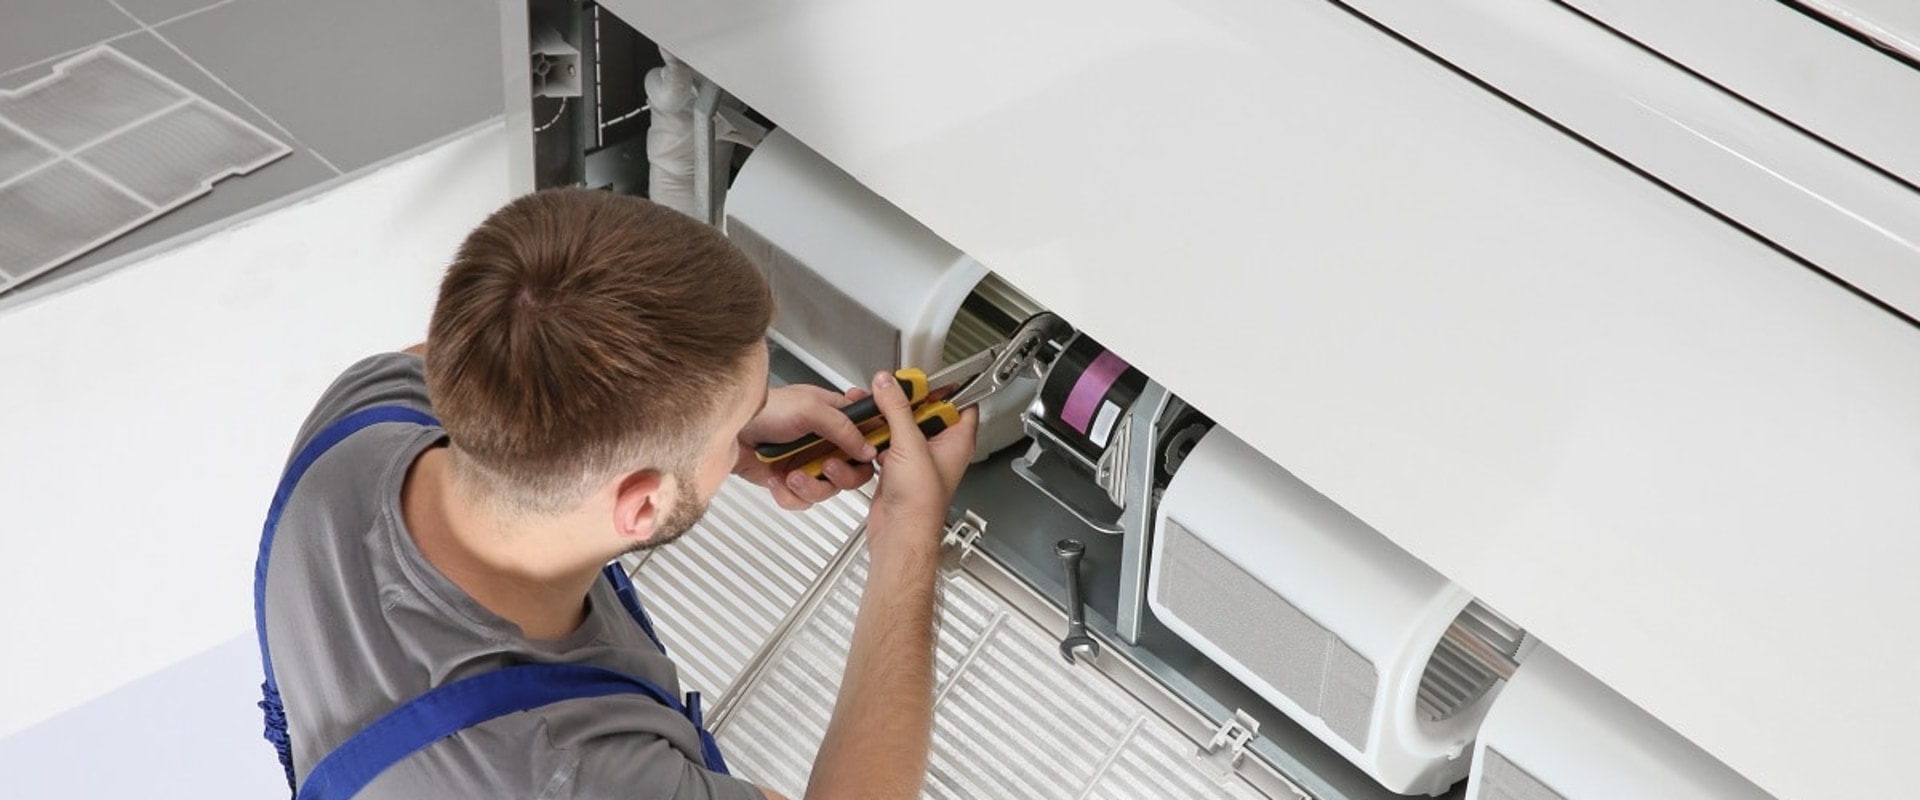 Does HVAC Maintenance in Coral Springs, FL Offer Discounts for Regular Customers?